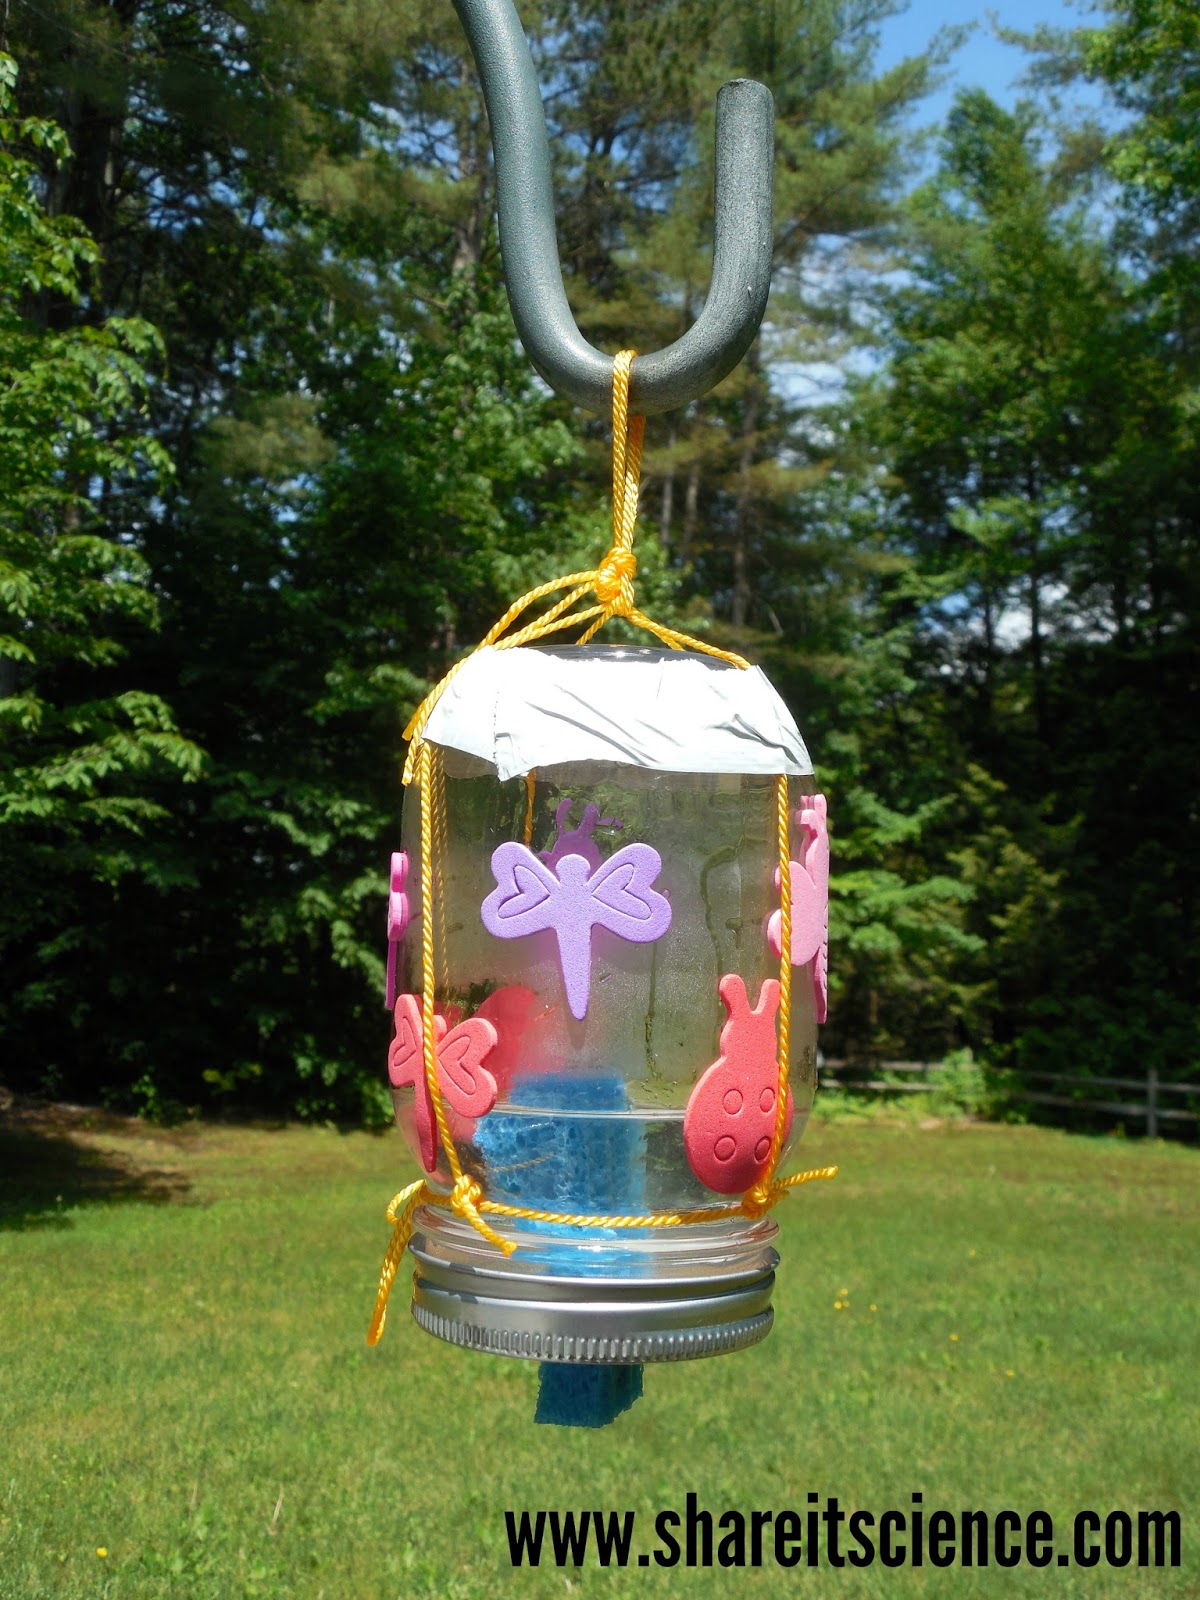 Share it! Science : The Great Backyard Butterfly Experiment!